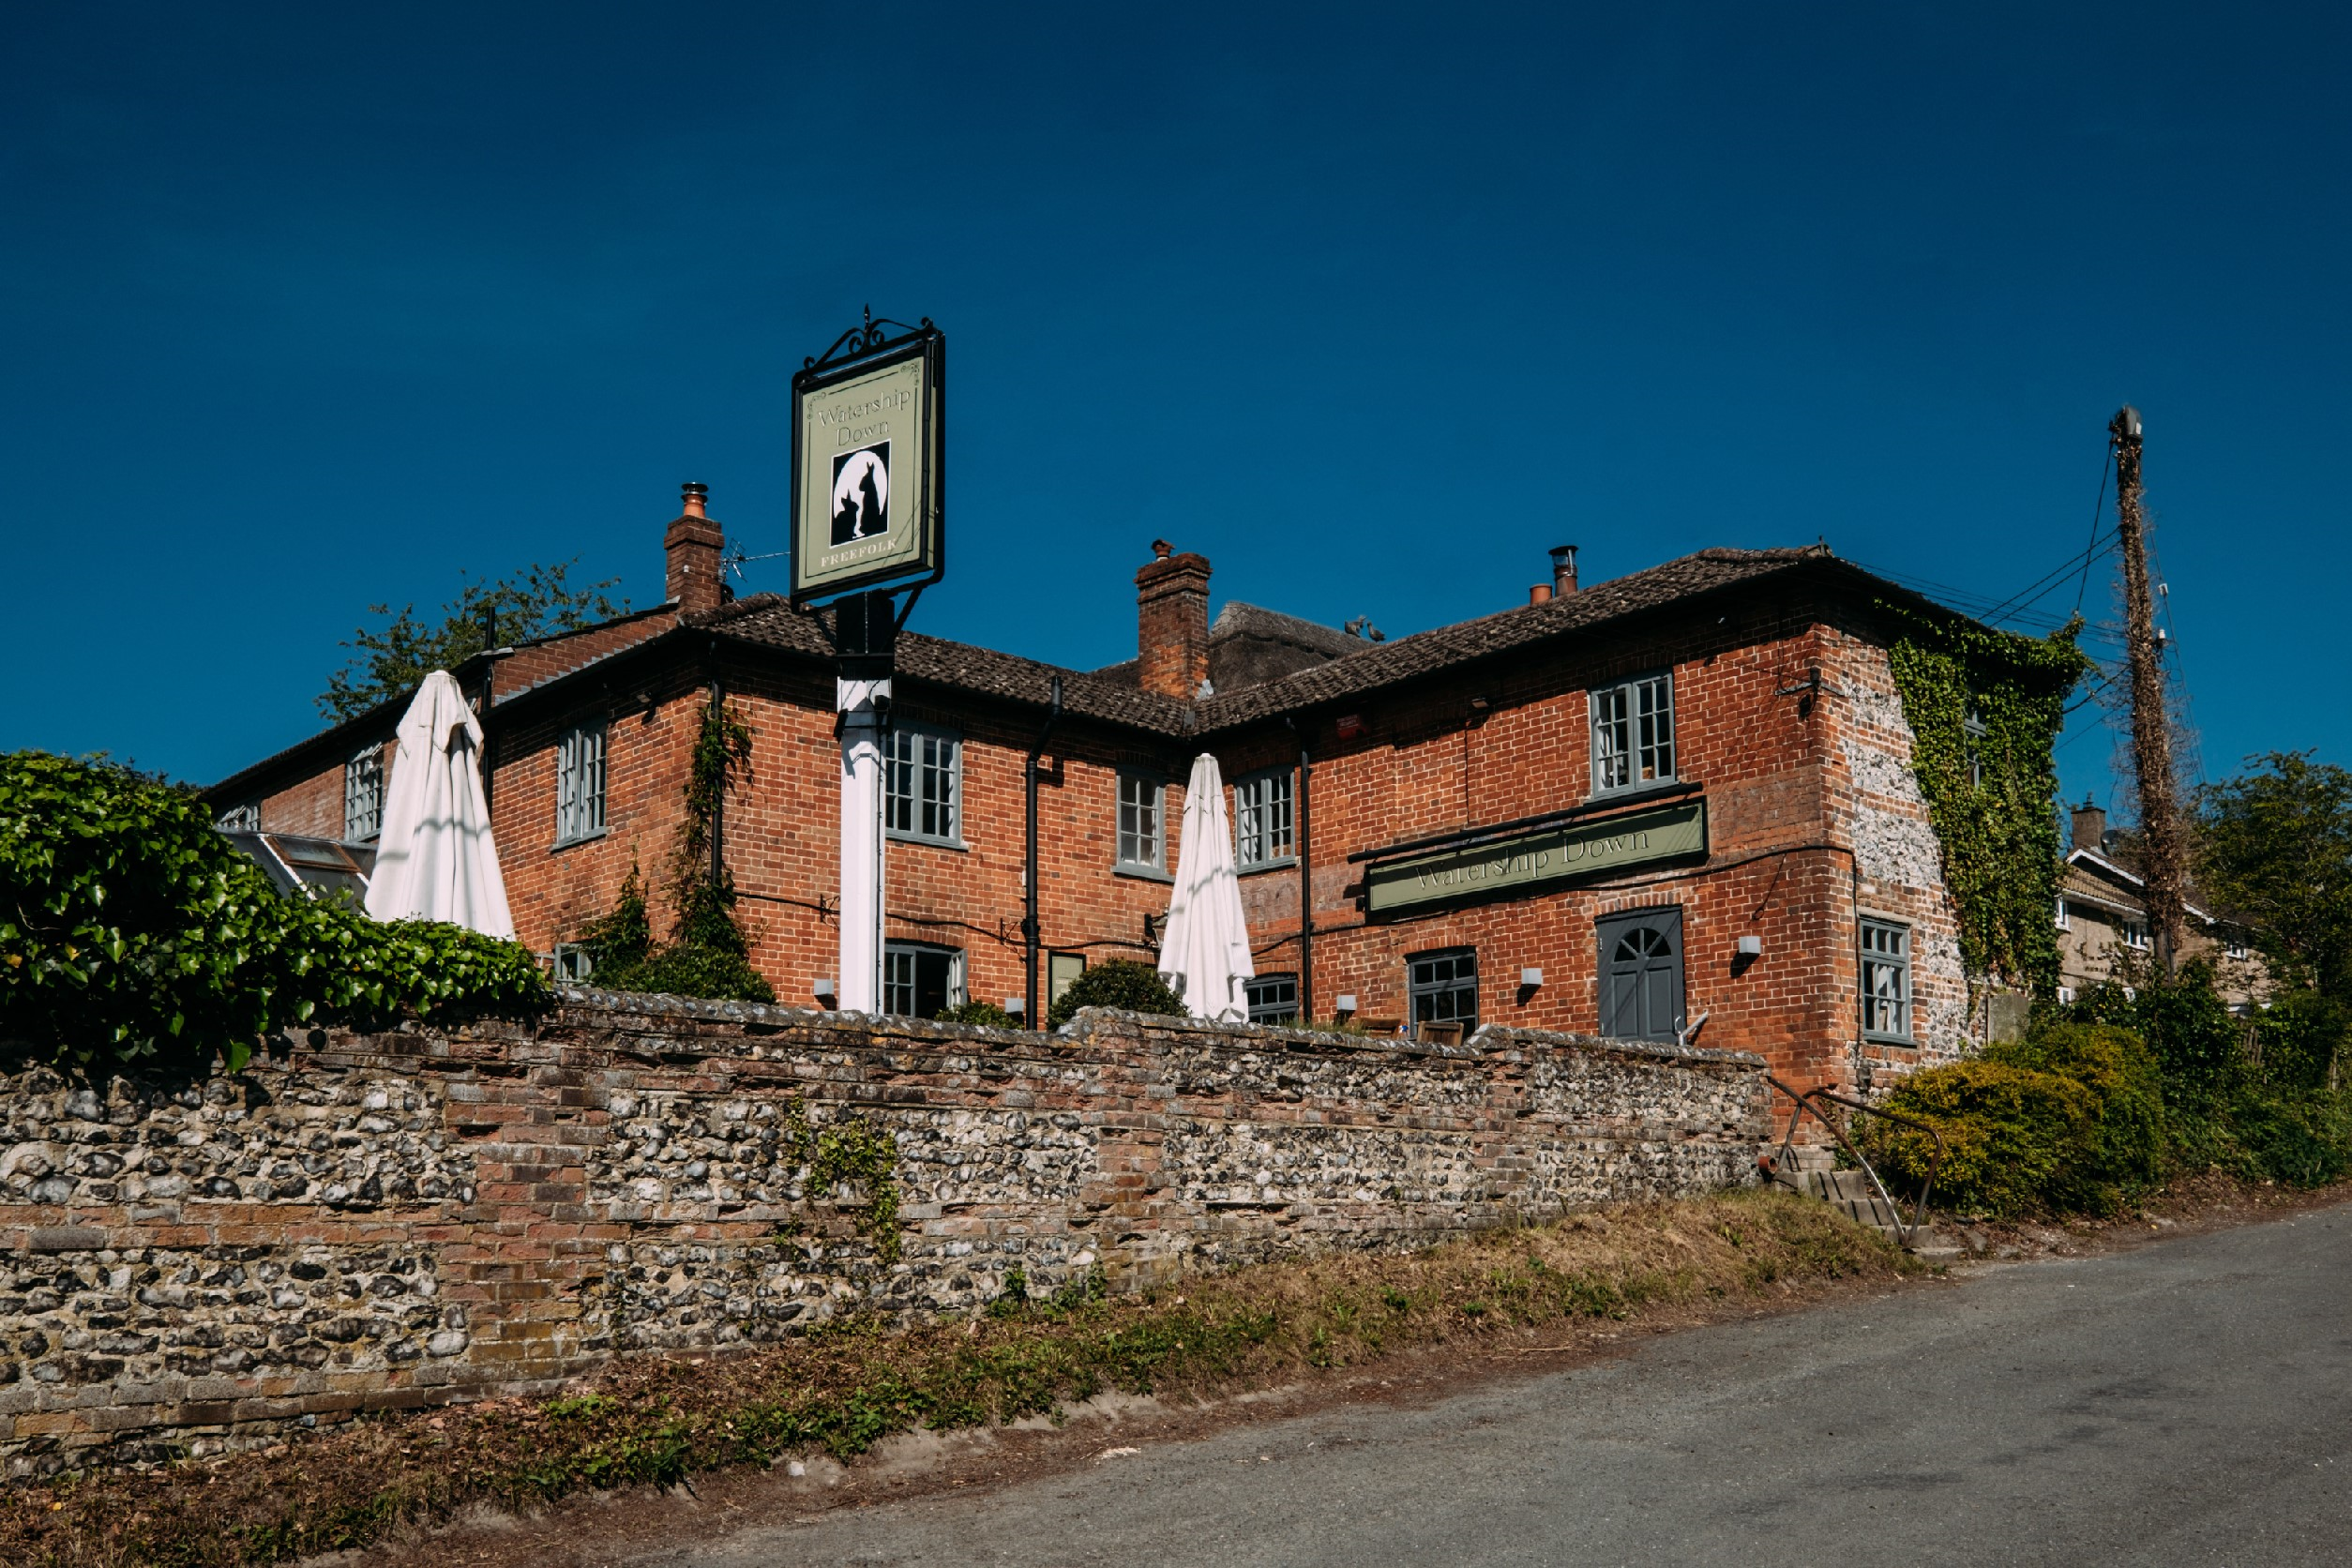 The outside of Watership Down Inn, a red brick two storey building with a stone wall in front. Popping out above the wall you can see two umbrellas which are down and the pub sign.